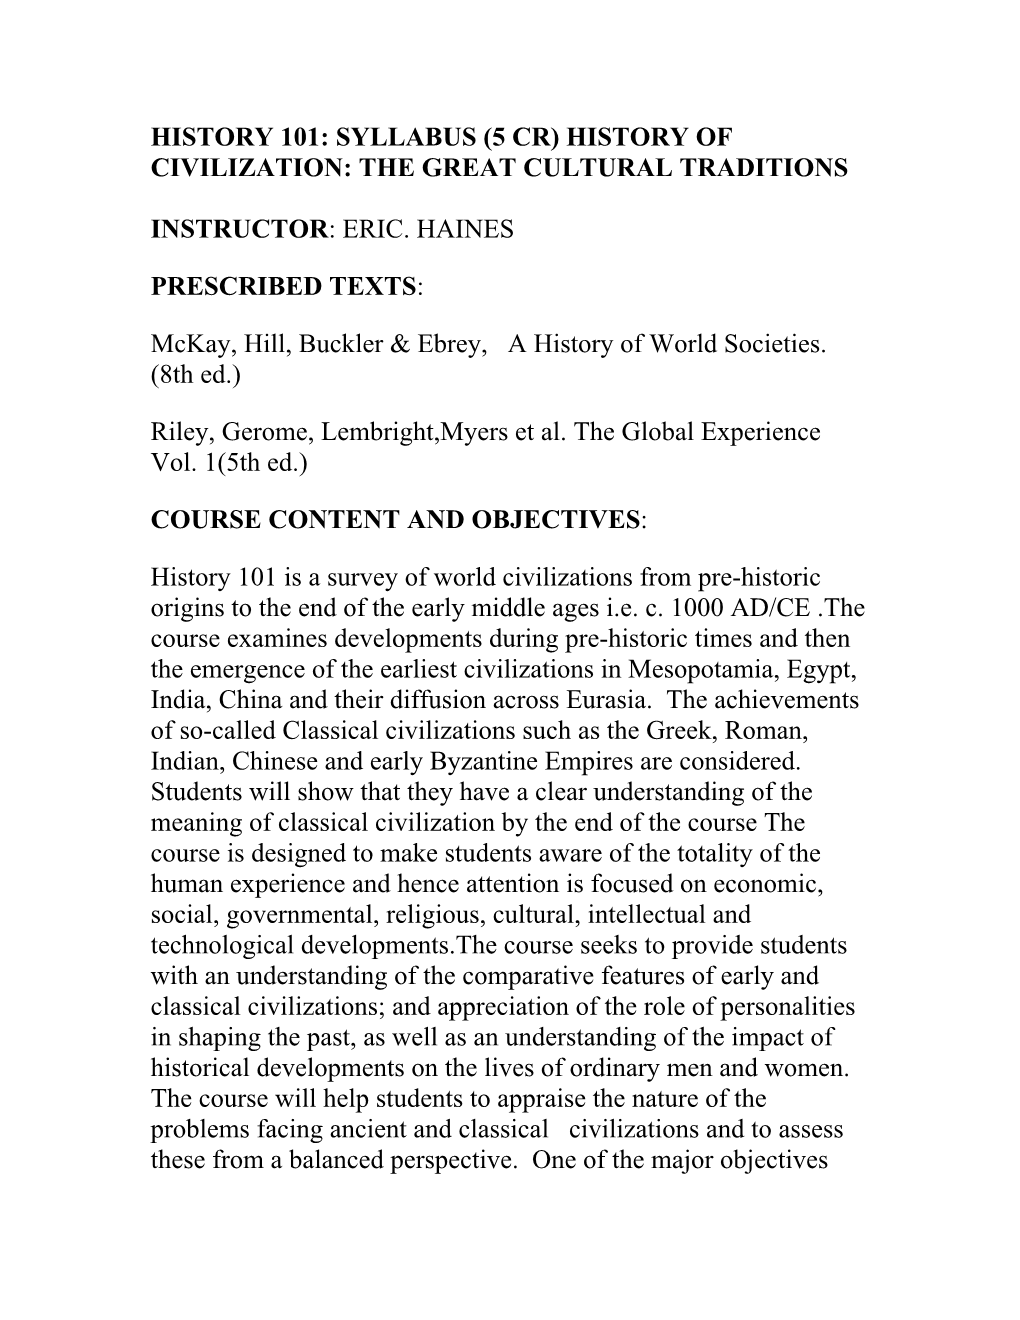 History 101: Syllabus (5 Cr) History of Civilization: the Great Cultural Traditions